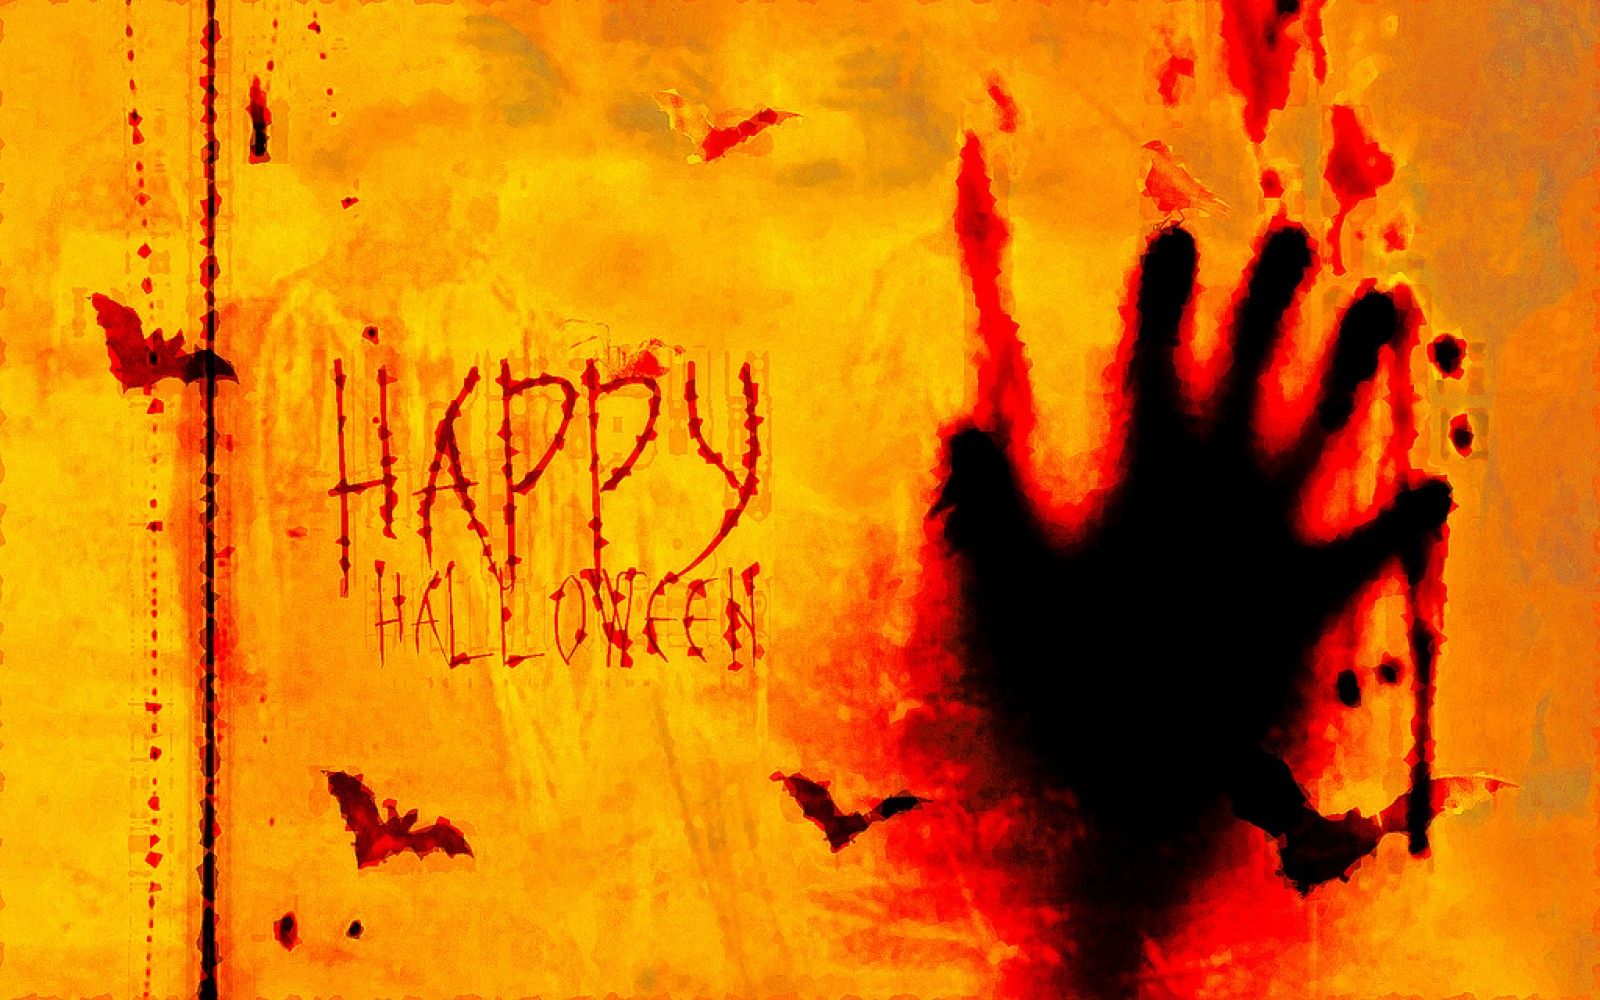 Scary Happy Halloween 2017 Picture & Wallpaper